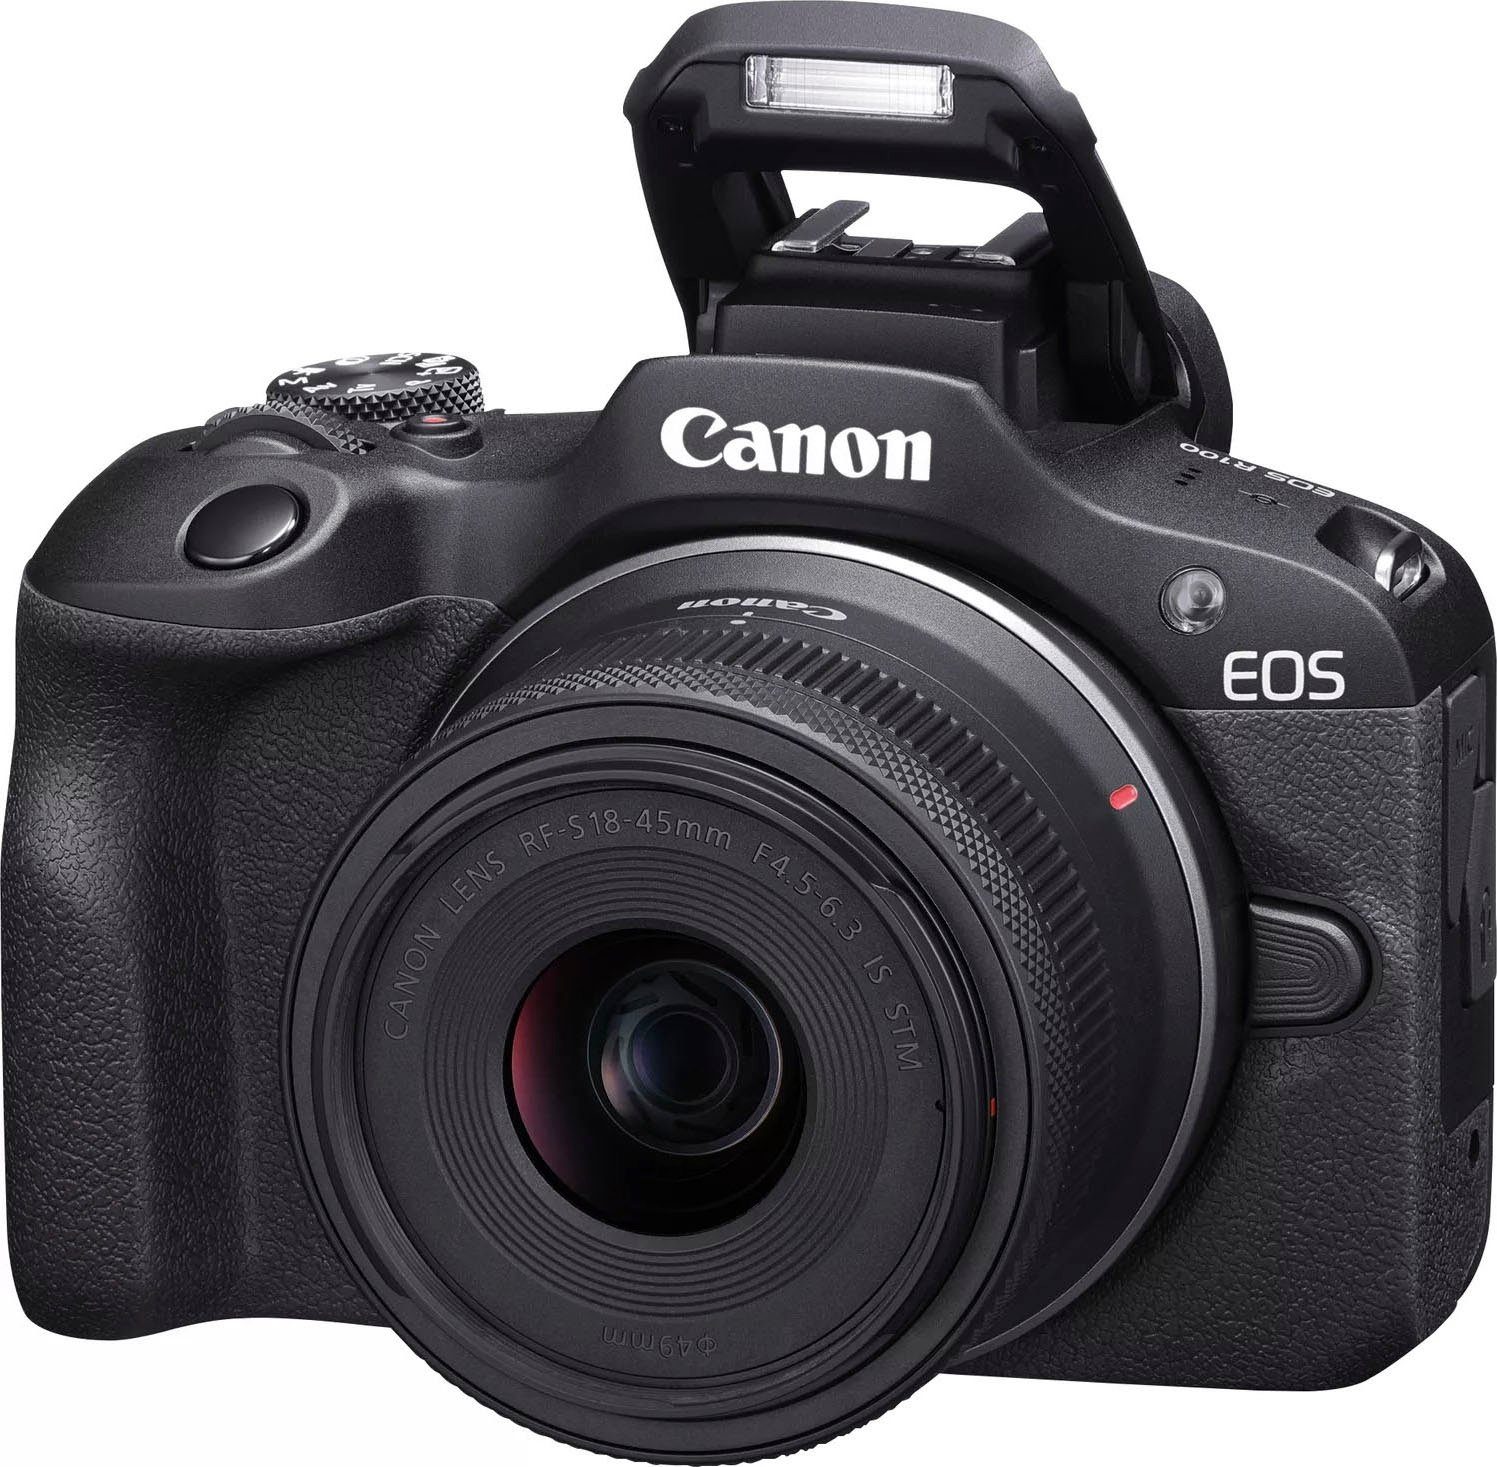 Canon EOS R100 + RF-S STM F4.5-6.3 STM, Kit Bluetooth, 24,1 (RF-S 18-45mm IS IS 18-45mm MP, F4.5-6.3 WLAN) Systemkamera